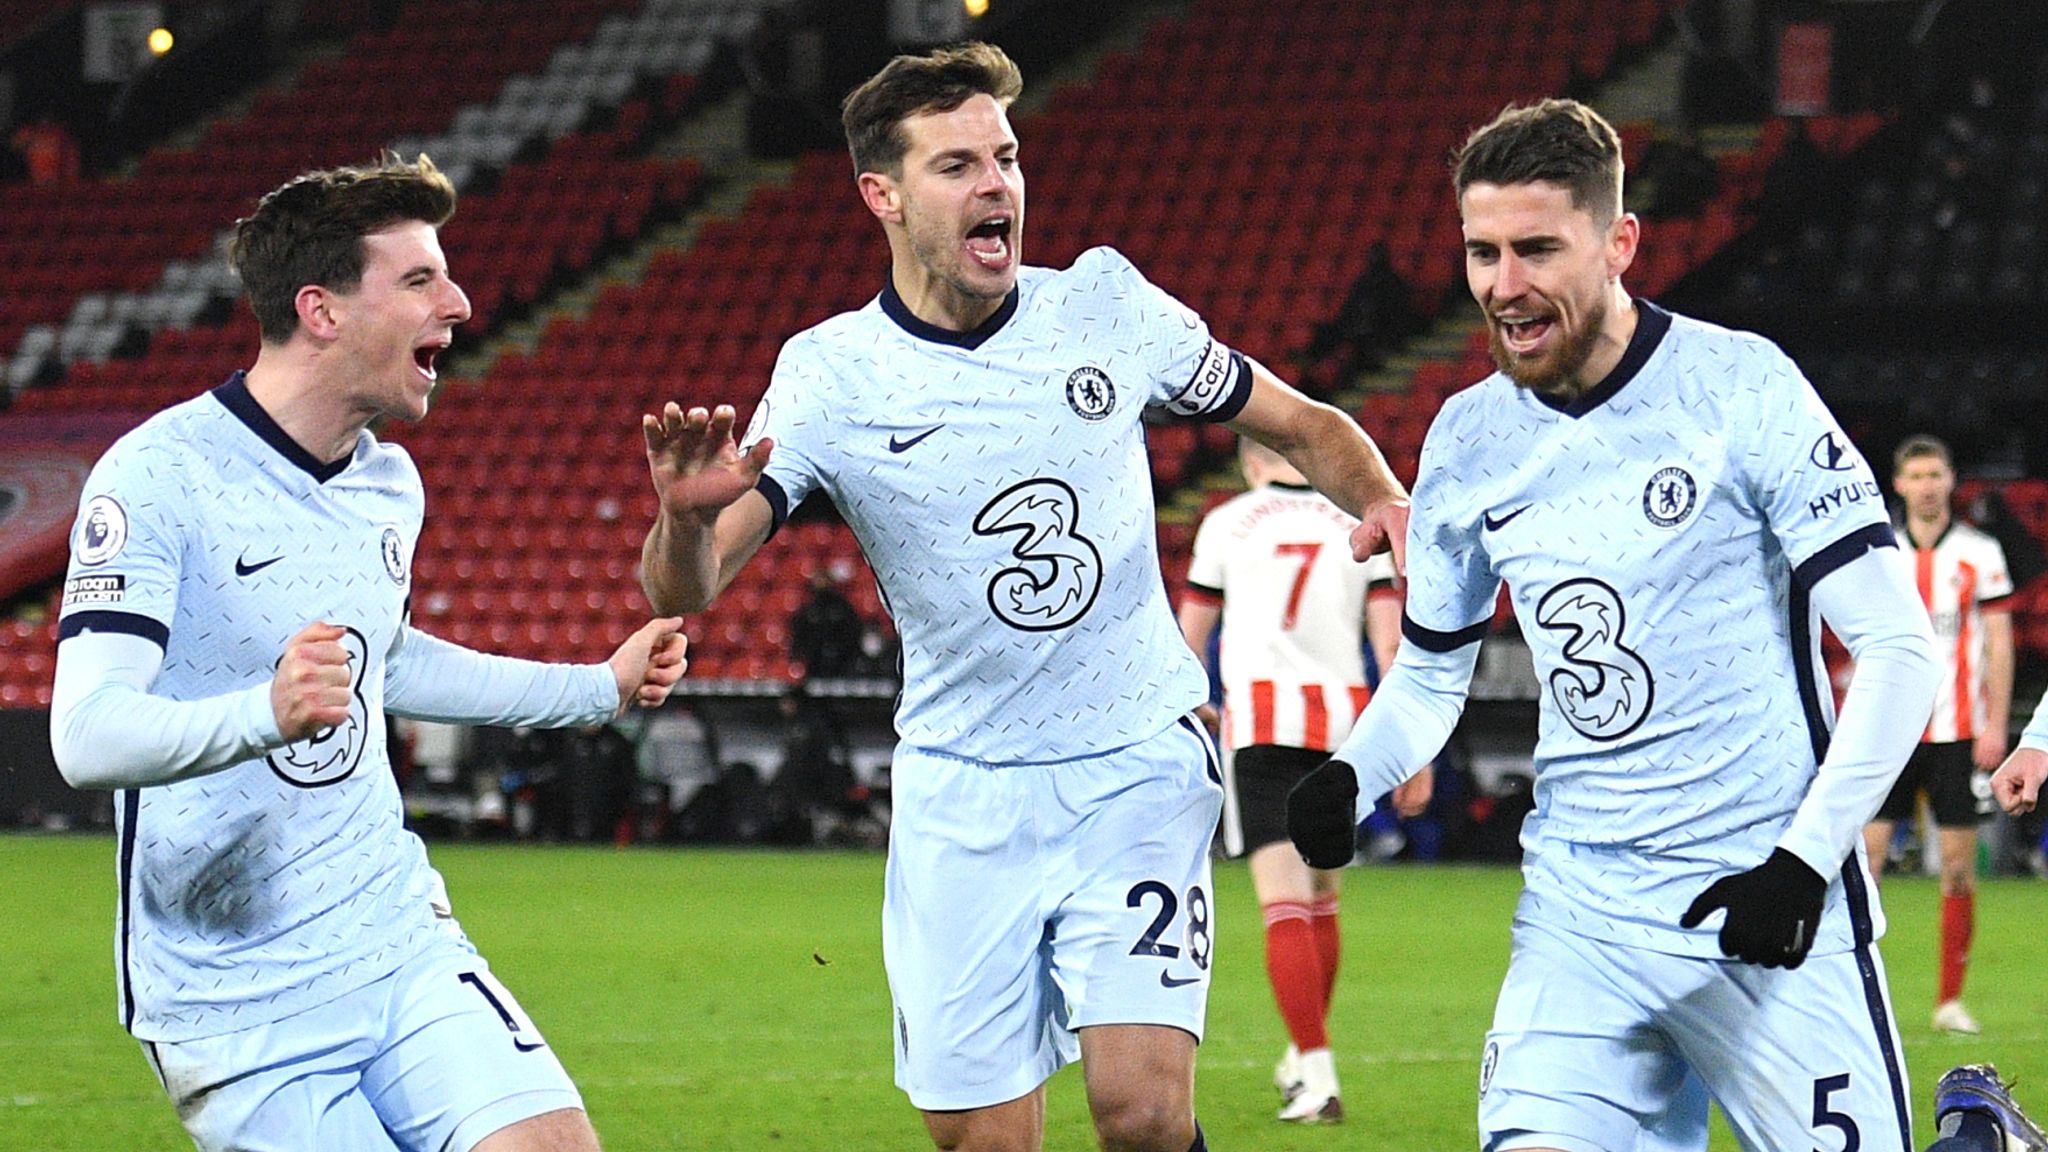 Sheffield United 1-2 Chelsea: Thomas Tuchel's side win at Bramall Lane to  move fifth in Premier League | Football News | Sky Sports